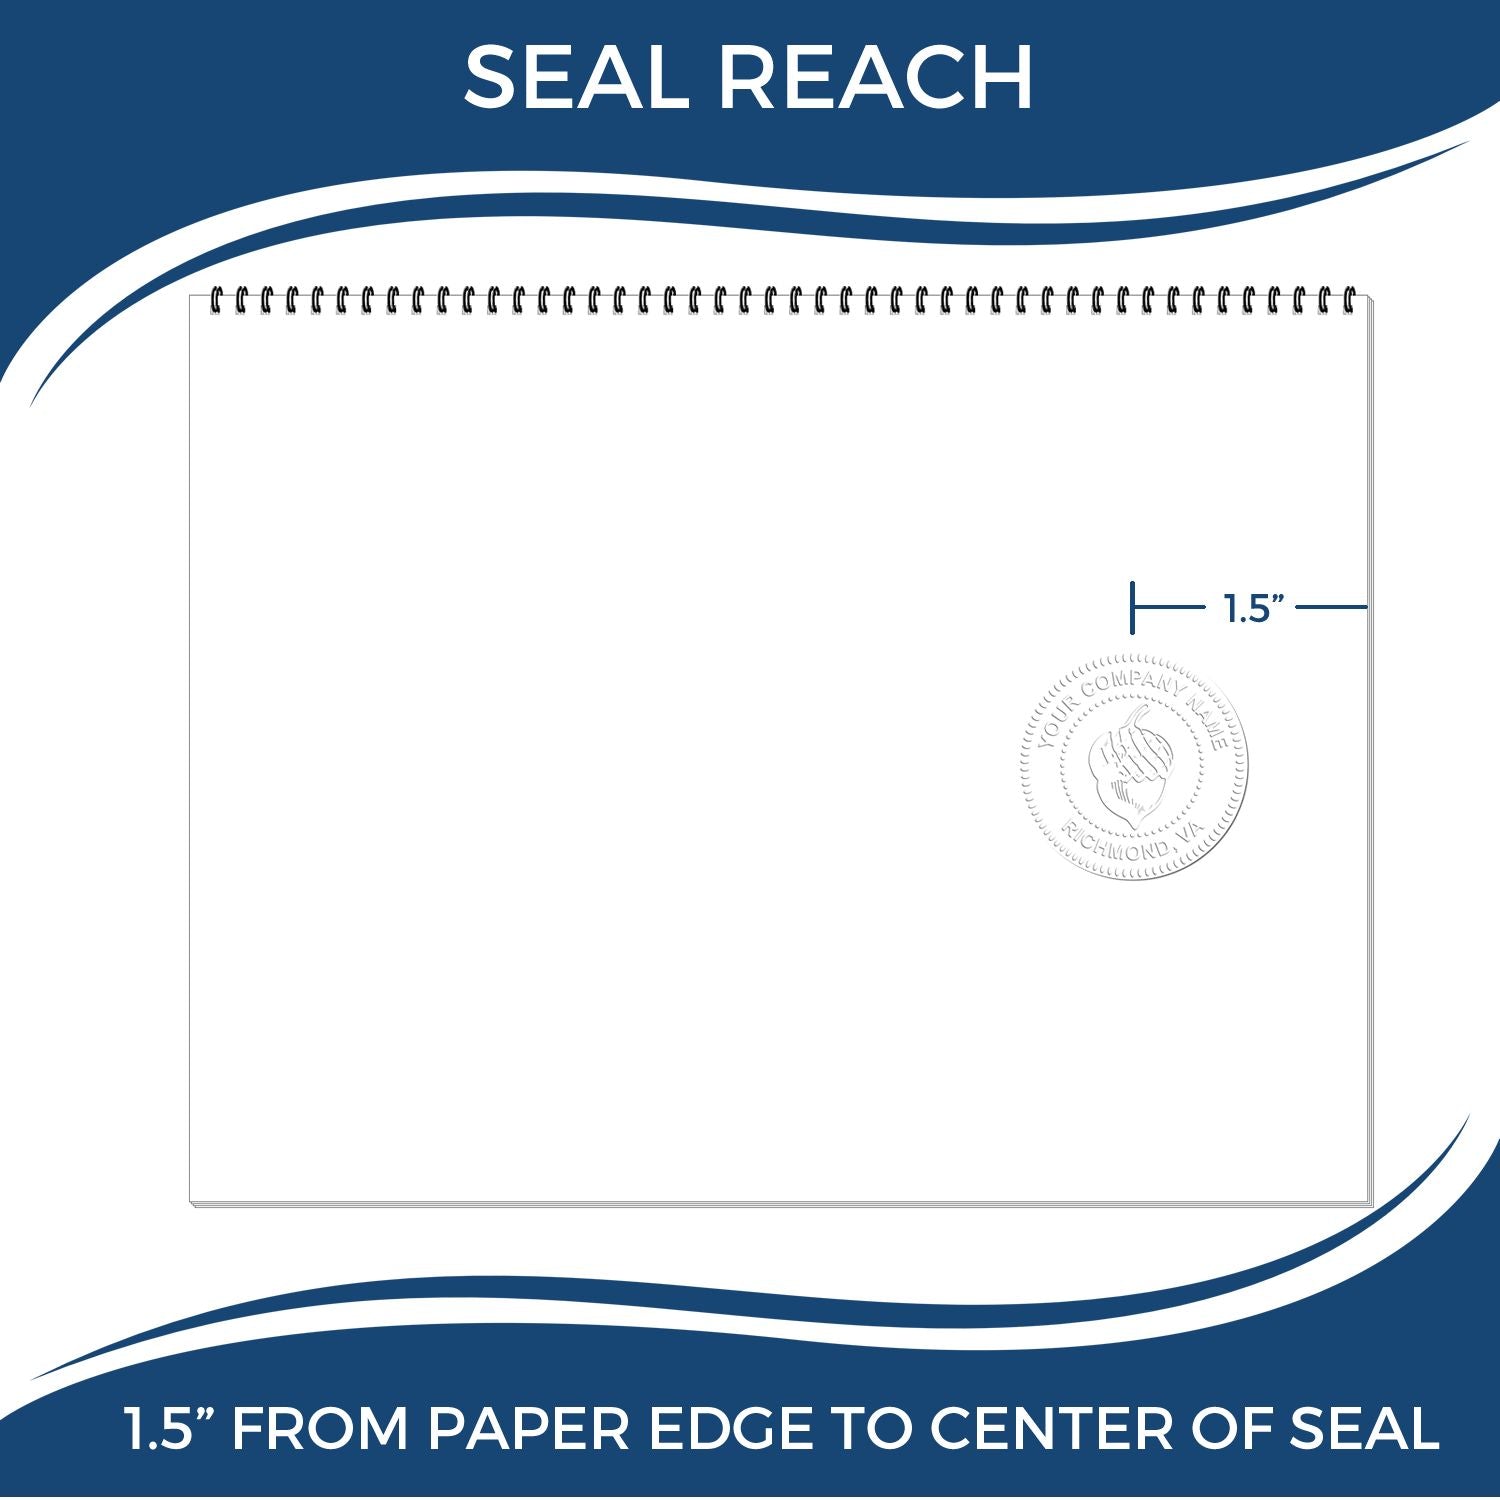 An infographic showing the seal reach which is represented by a ruler and a miniature seal image of the Gift South Dakota Geologist Seal